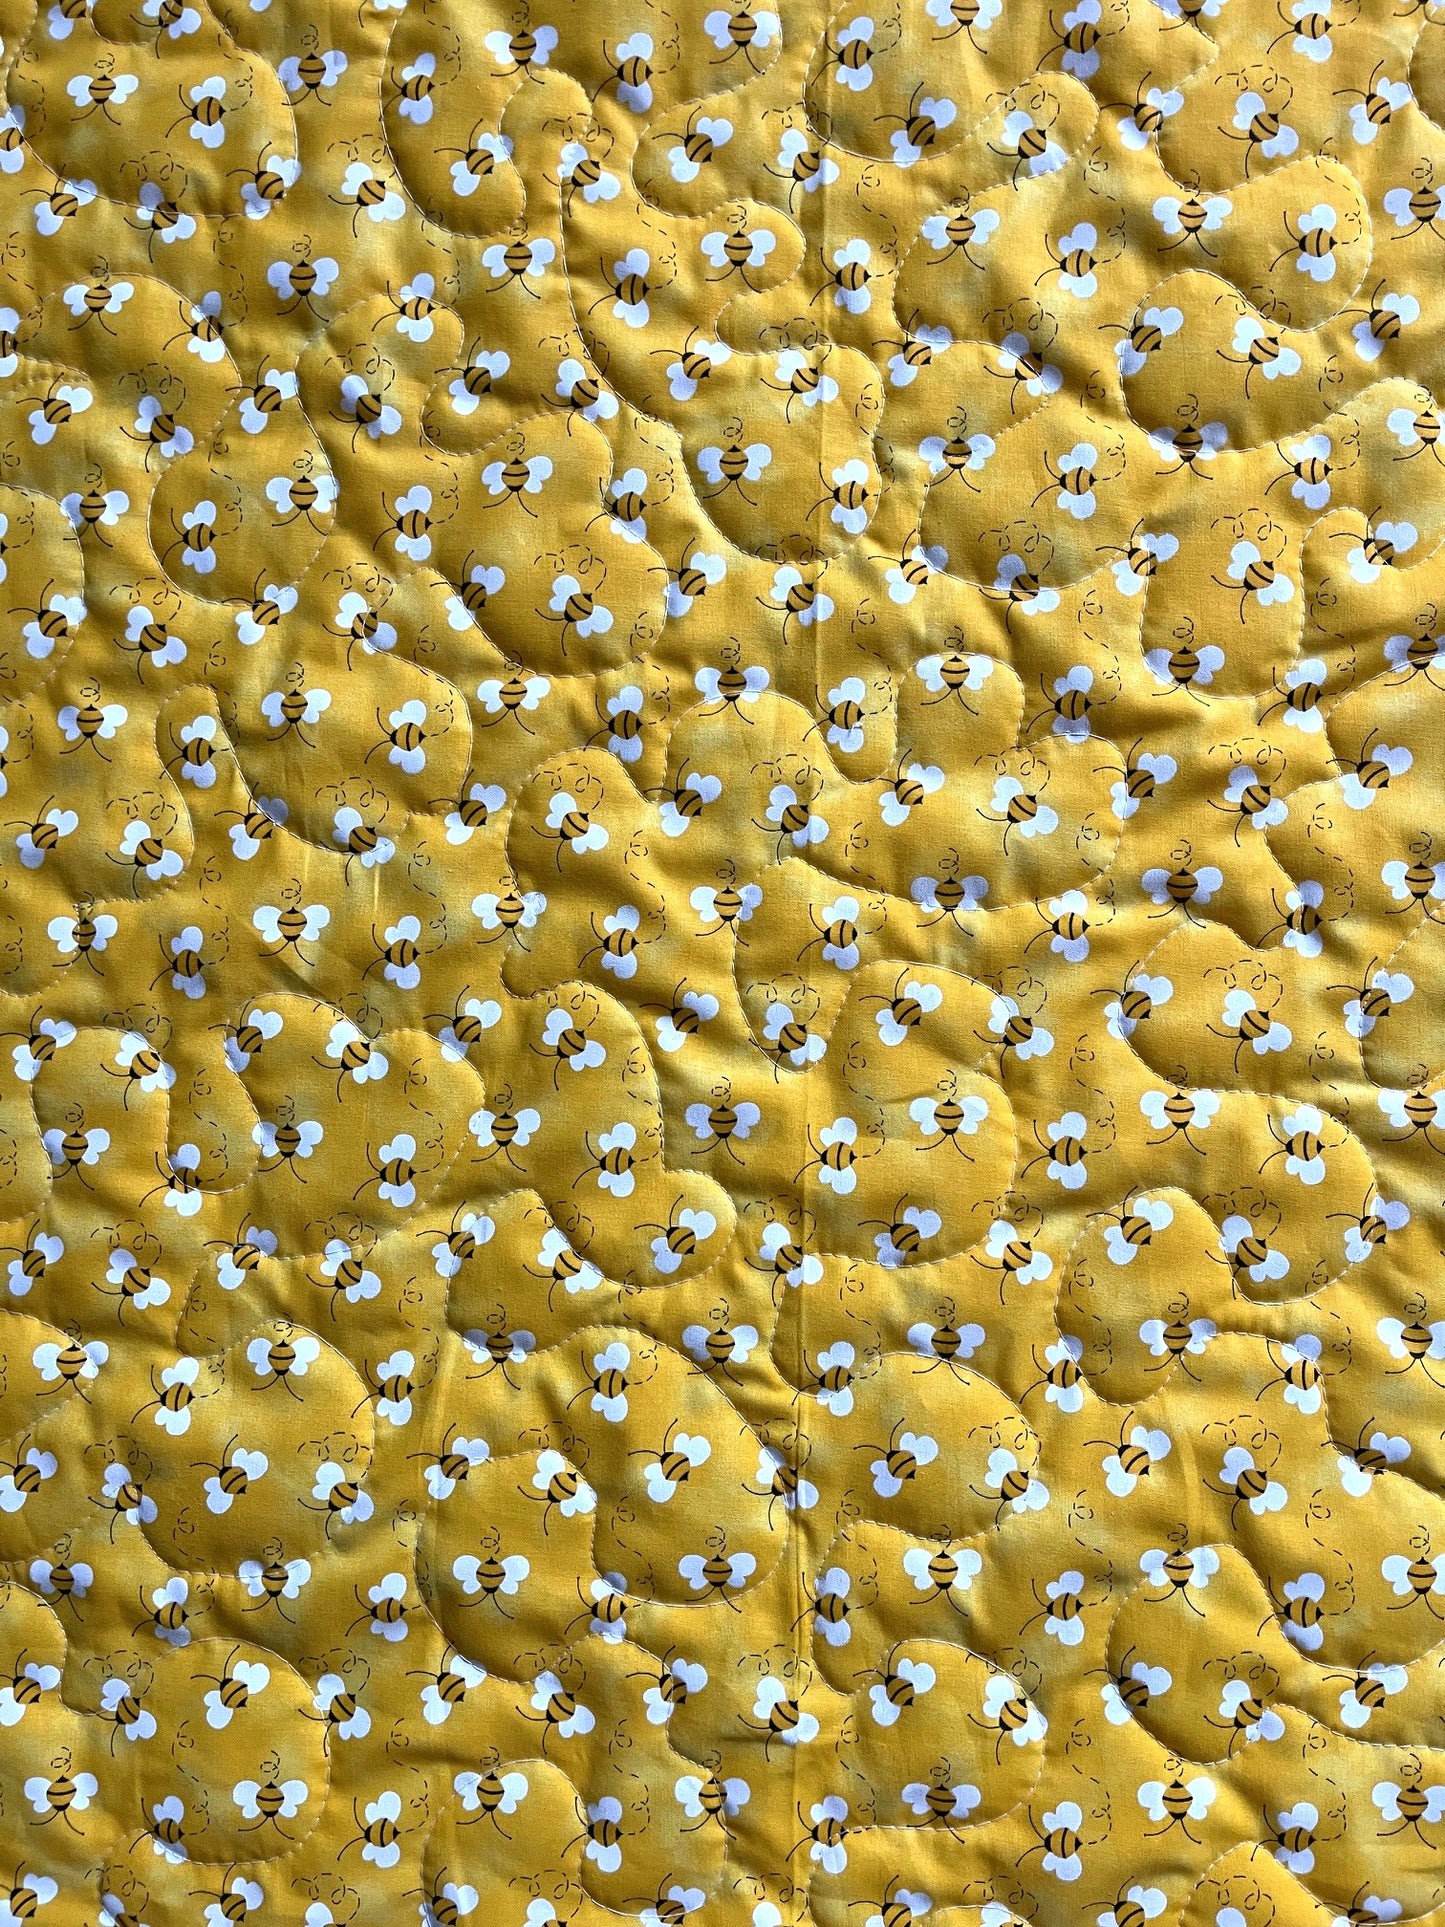 WINNIE THE POOH *TIME FOR A LITTLE SMACKEREL* HUNNY POTS & HONEY BEES Inspired Quilted Blanket